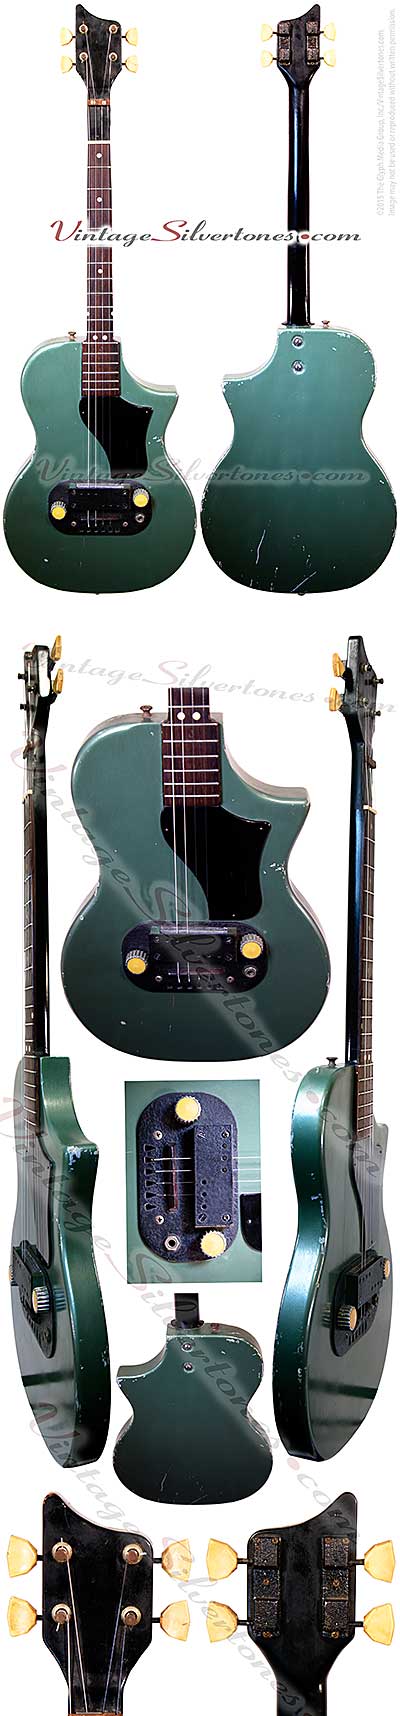 Supro tenor green-made in the USA